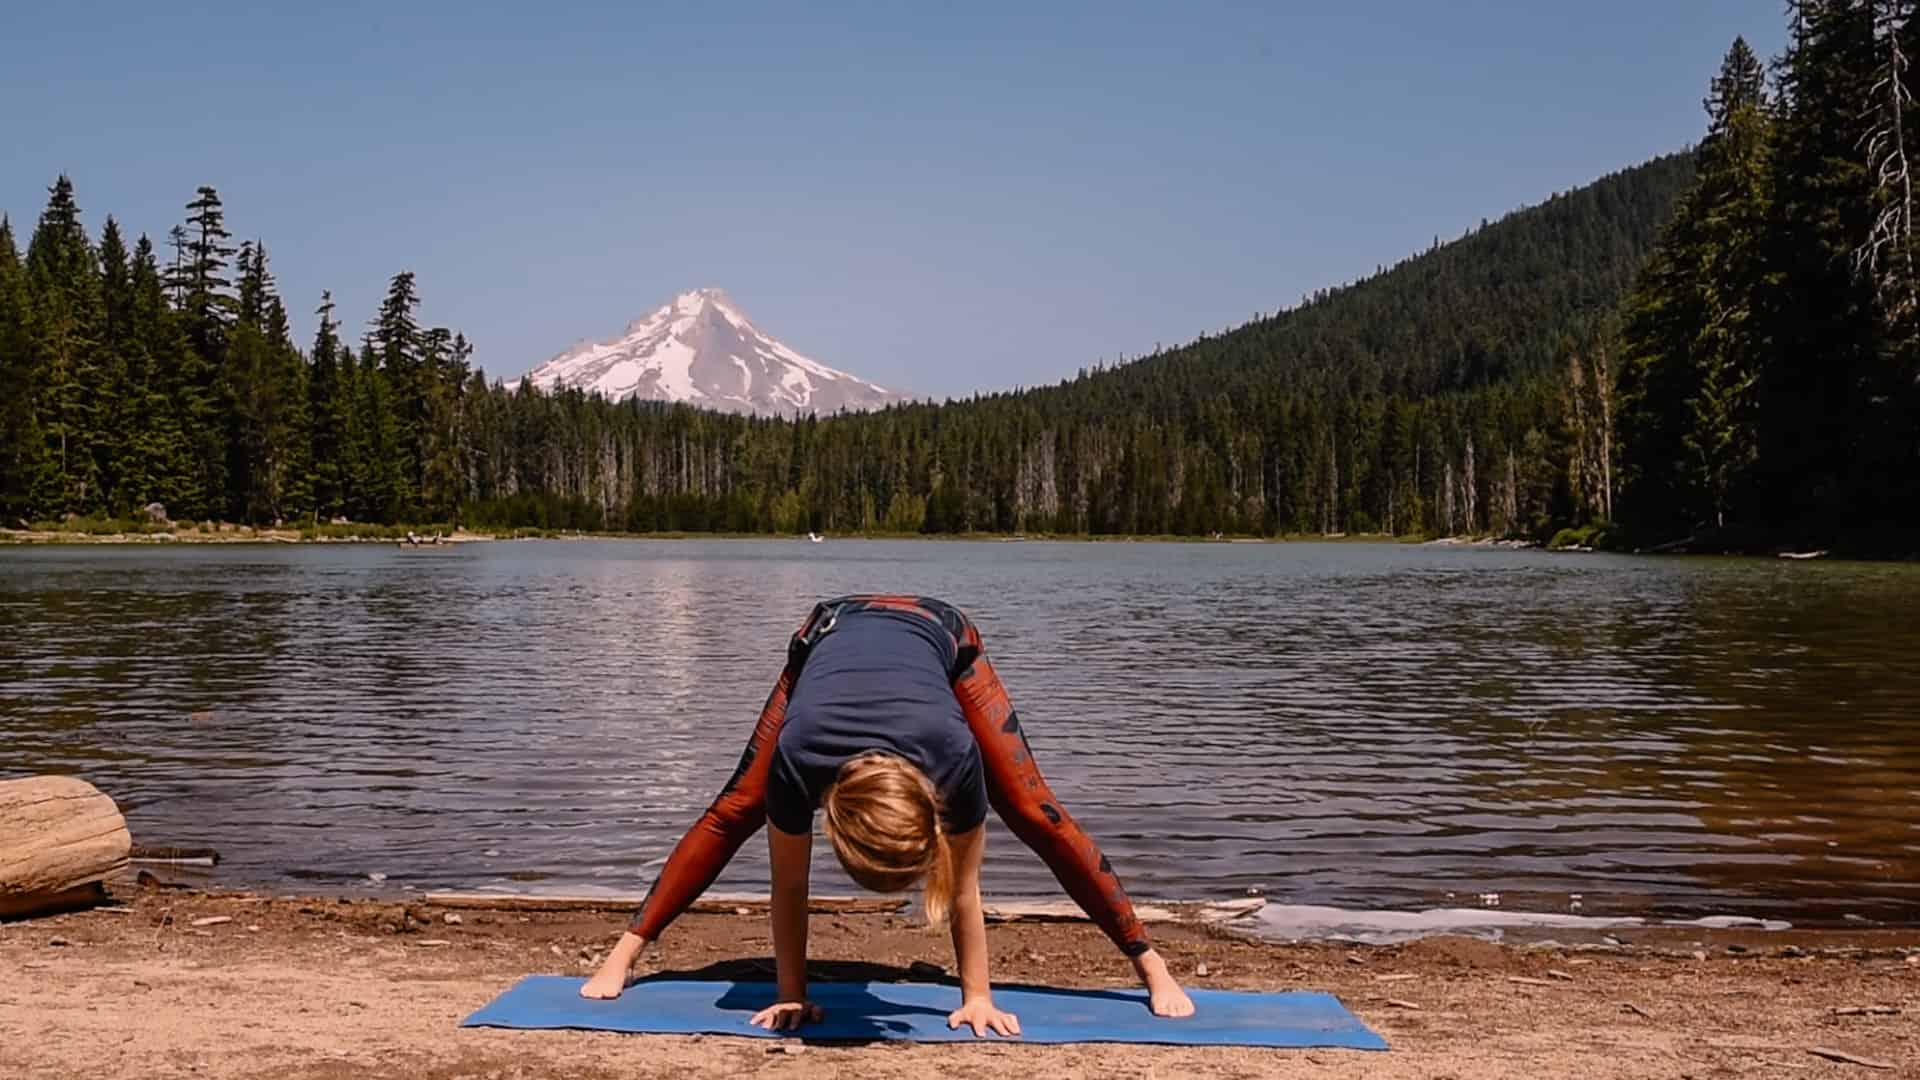 Emmy doing open a folded near an alpine lake for yoga to feel your best